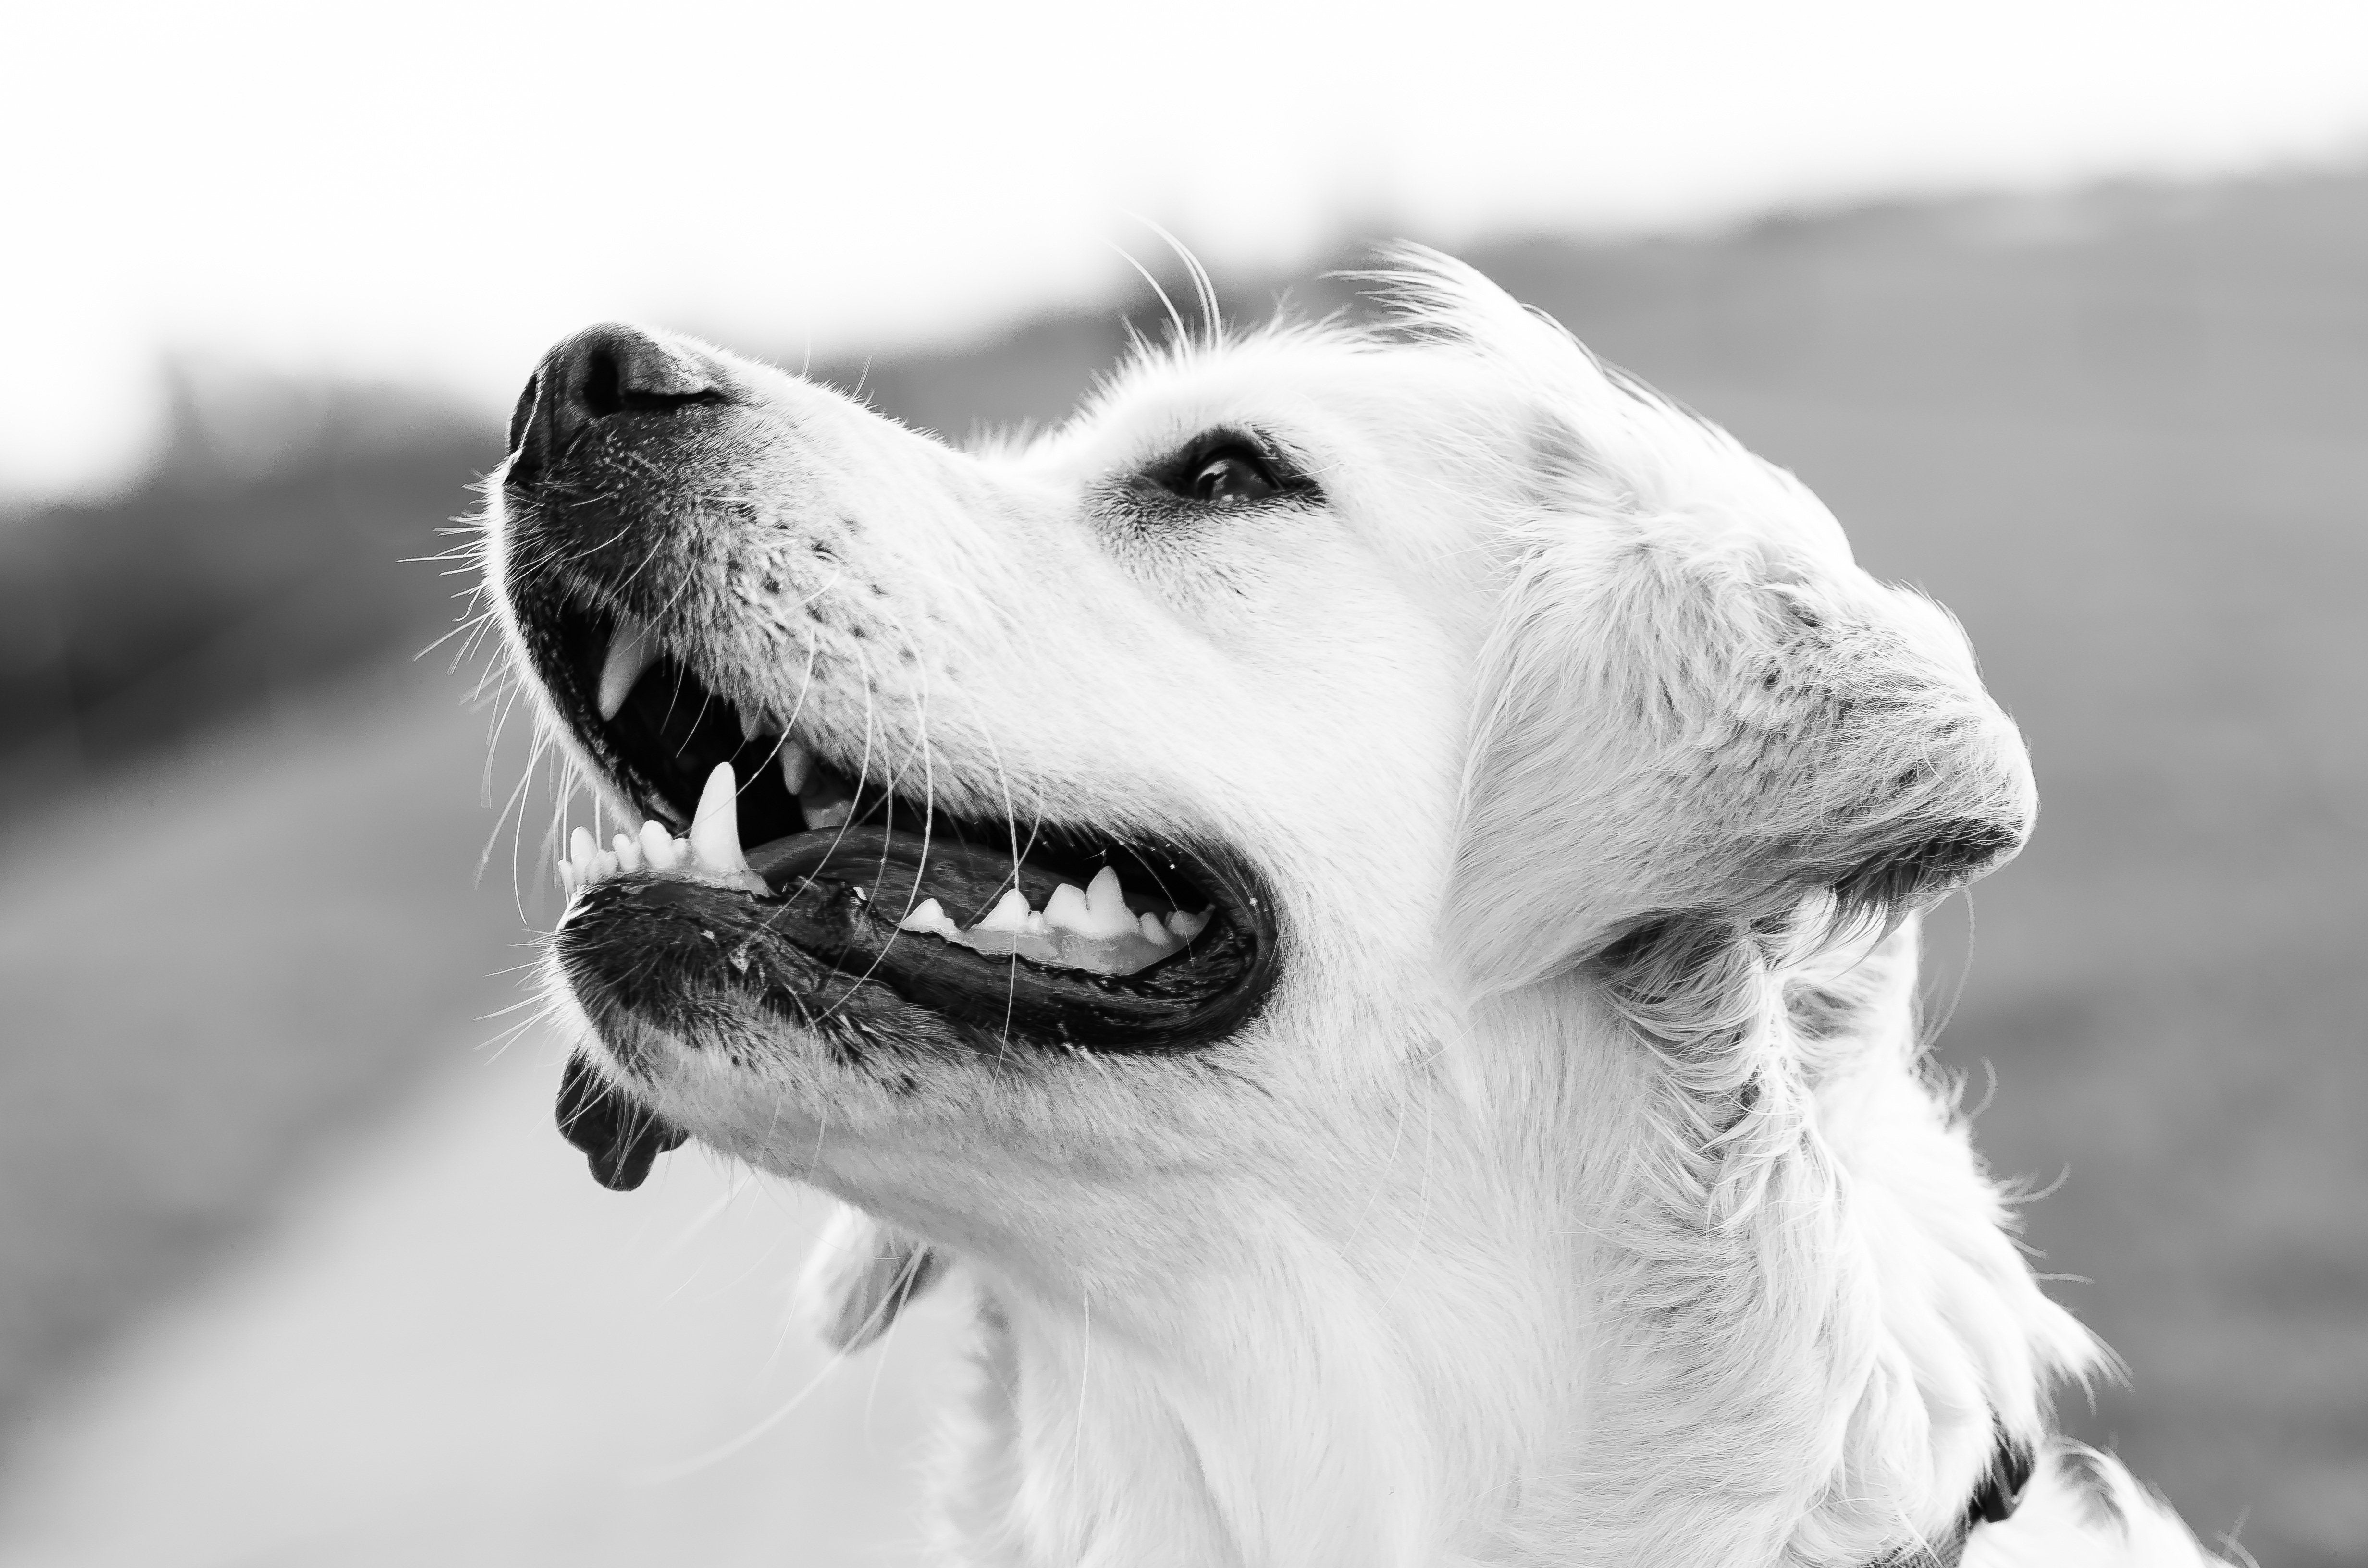 Your Pet’s Pearly Whites: Pet Dental Health Month